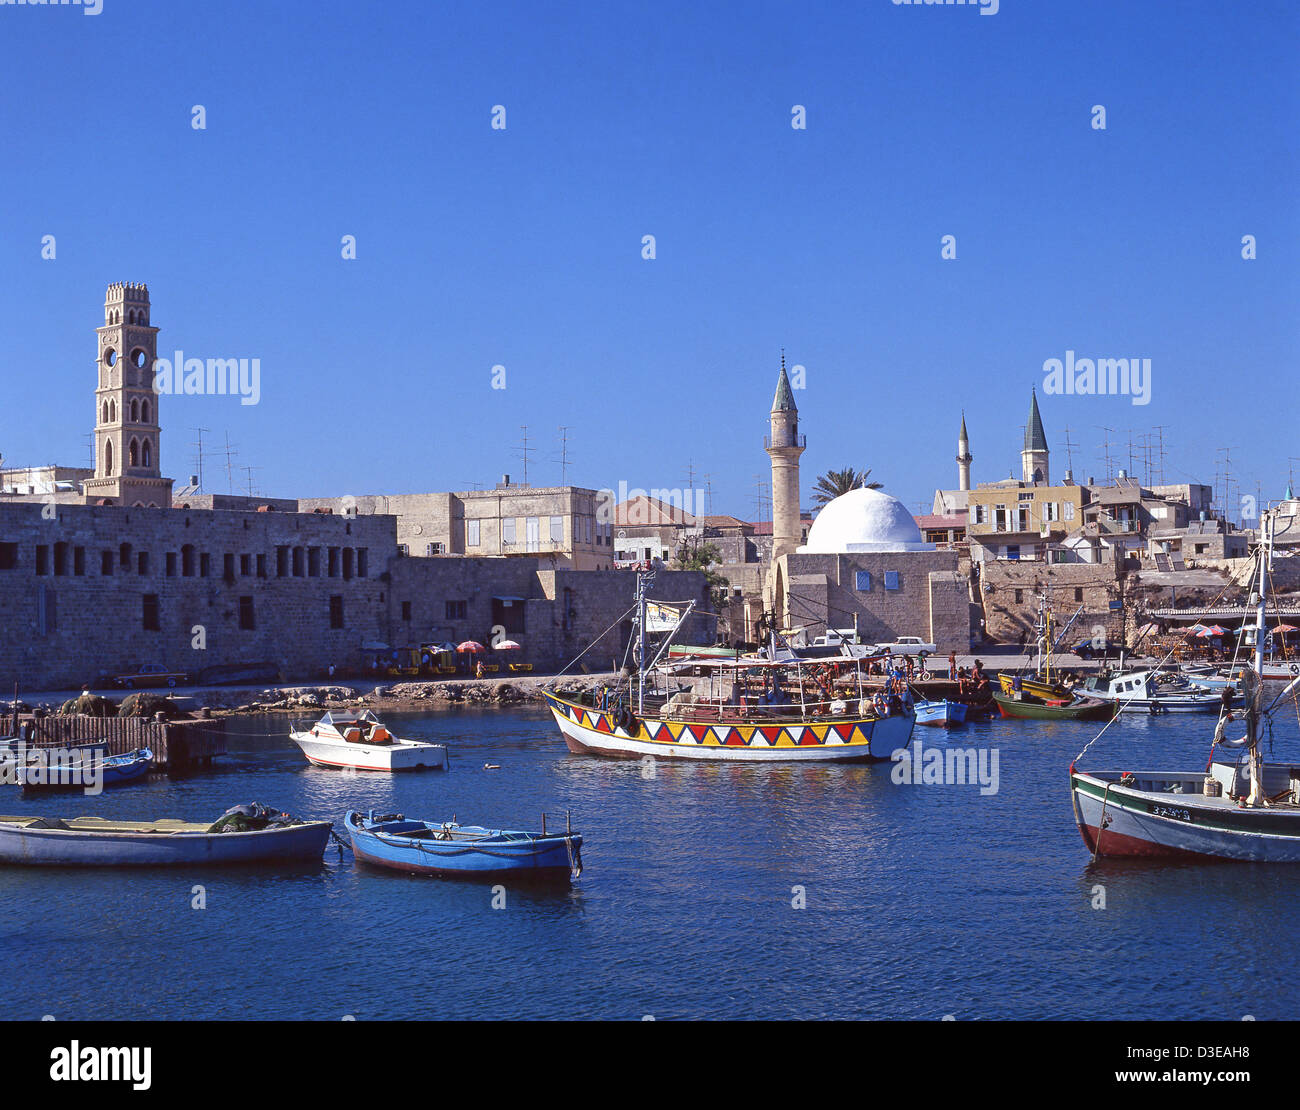 Old town and harbour, Acre (Akko), Western Galilee Region, Israel Stock Photo